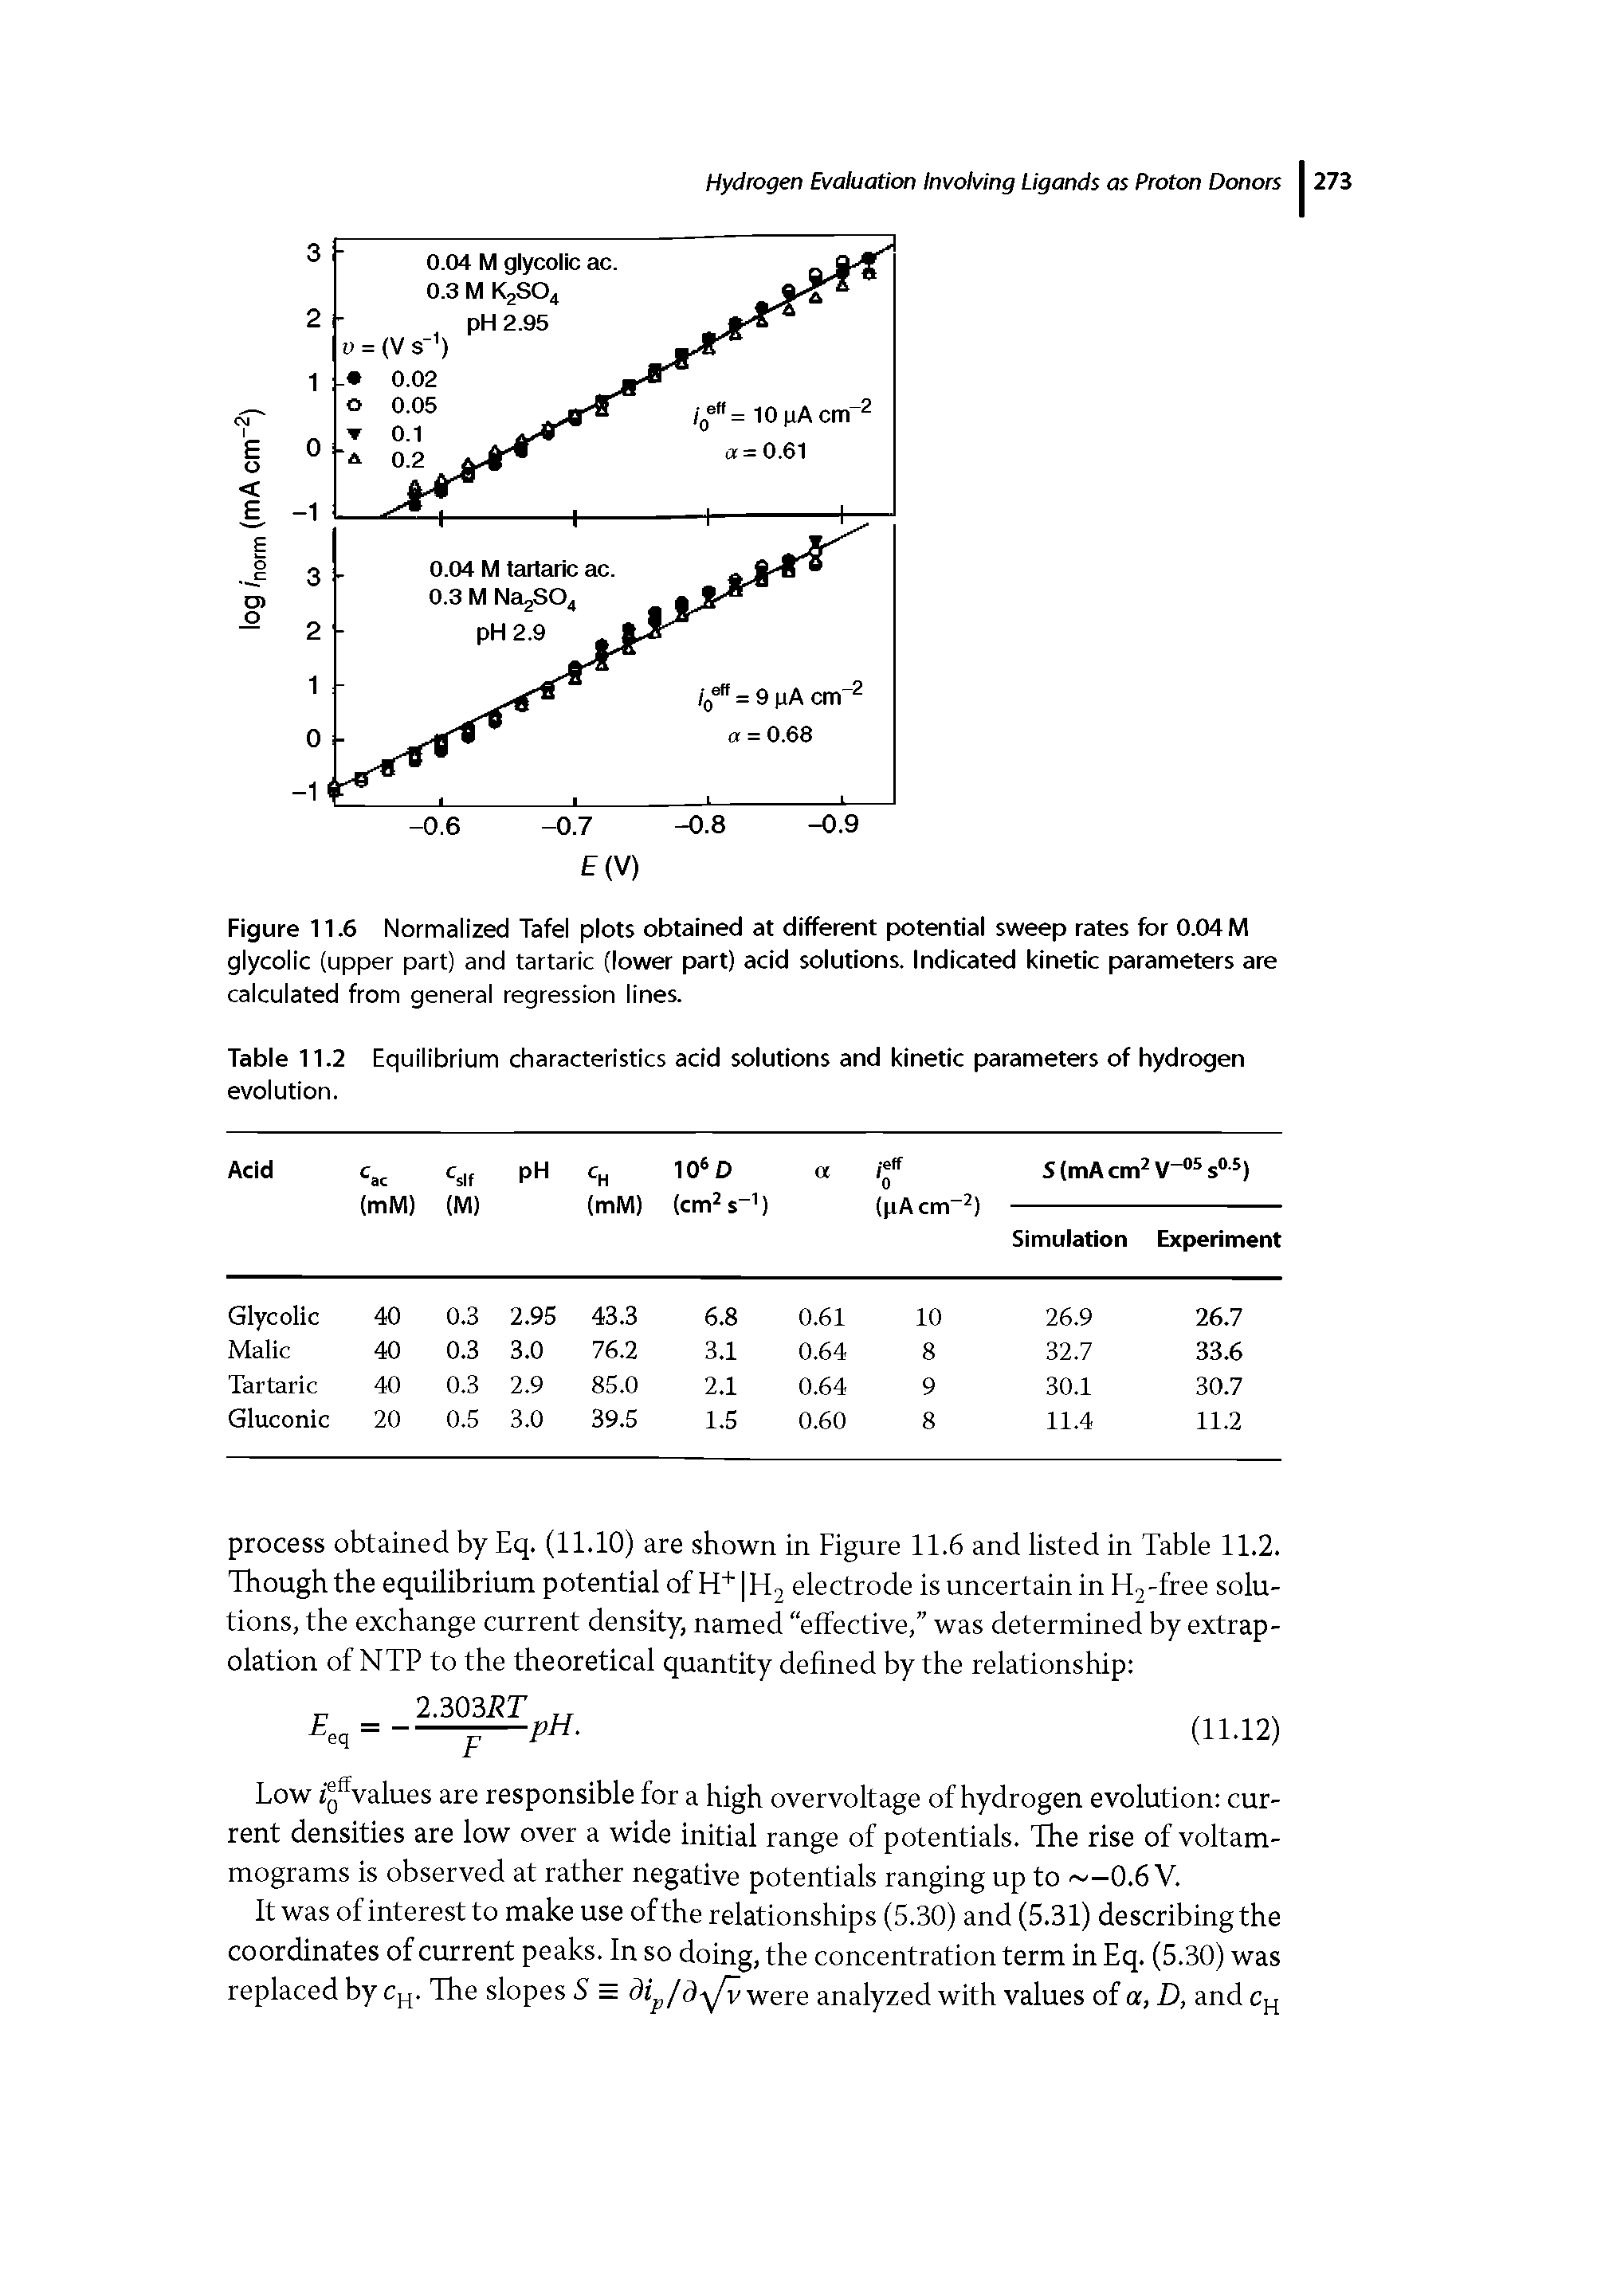 Figure 11.6 Normalized Tafel plots obtained at different potential sweep rates for 0.04M glycolic (upper part) and tartaric (lower part) acid solutions. Indicated kinetic parameters are calculated from general regression lines.